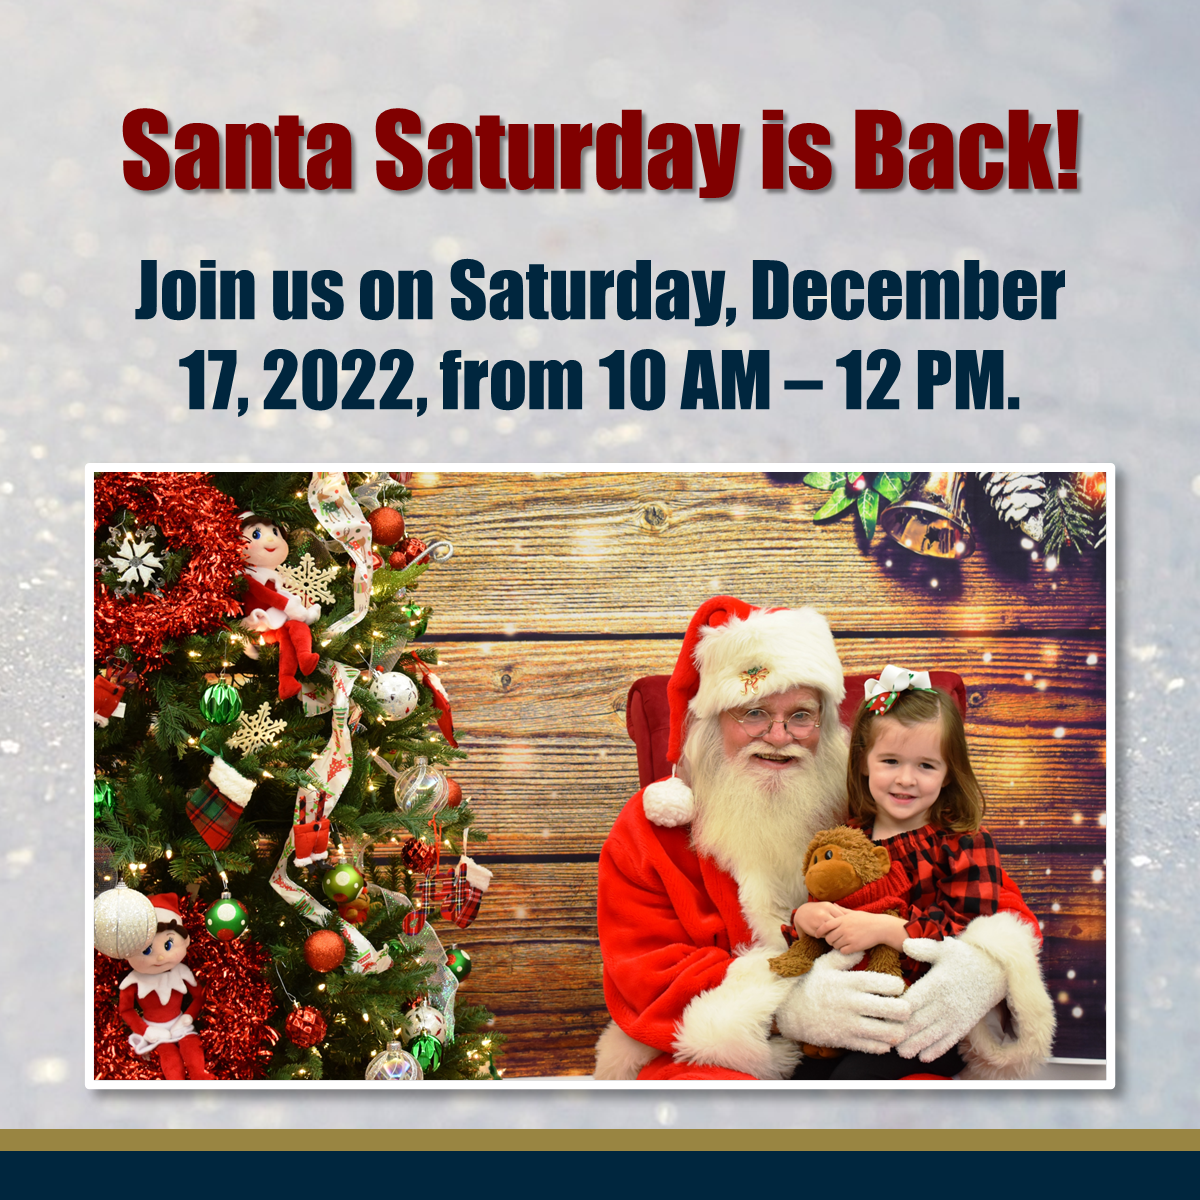 Santa Saturday is Back! Join us on Saturday, December 17, 2022, from 10 AM - 12 PM.